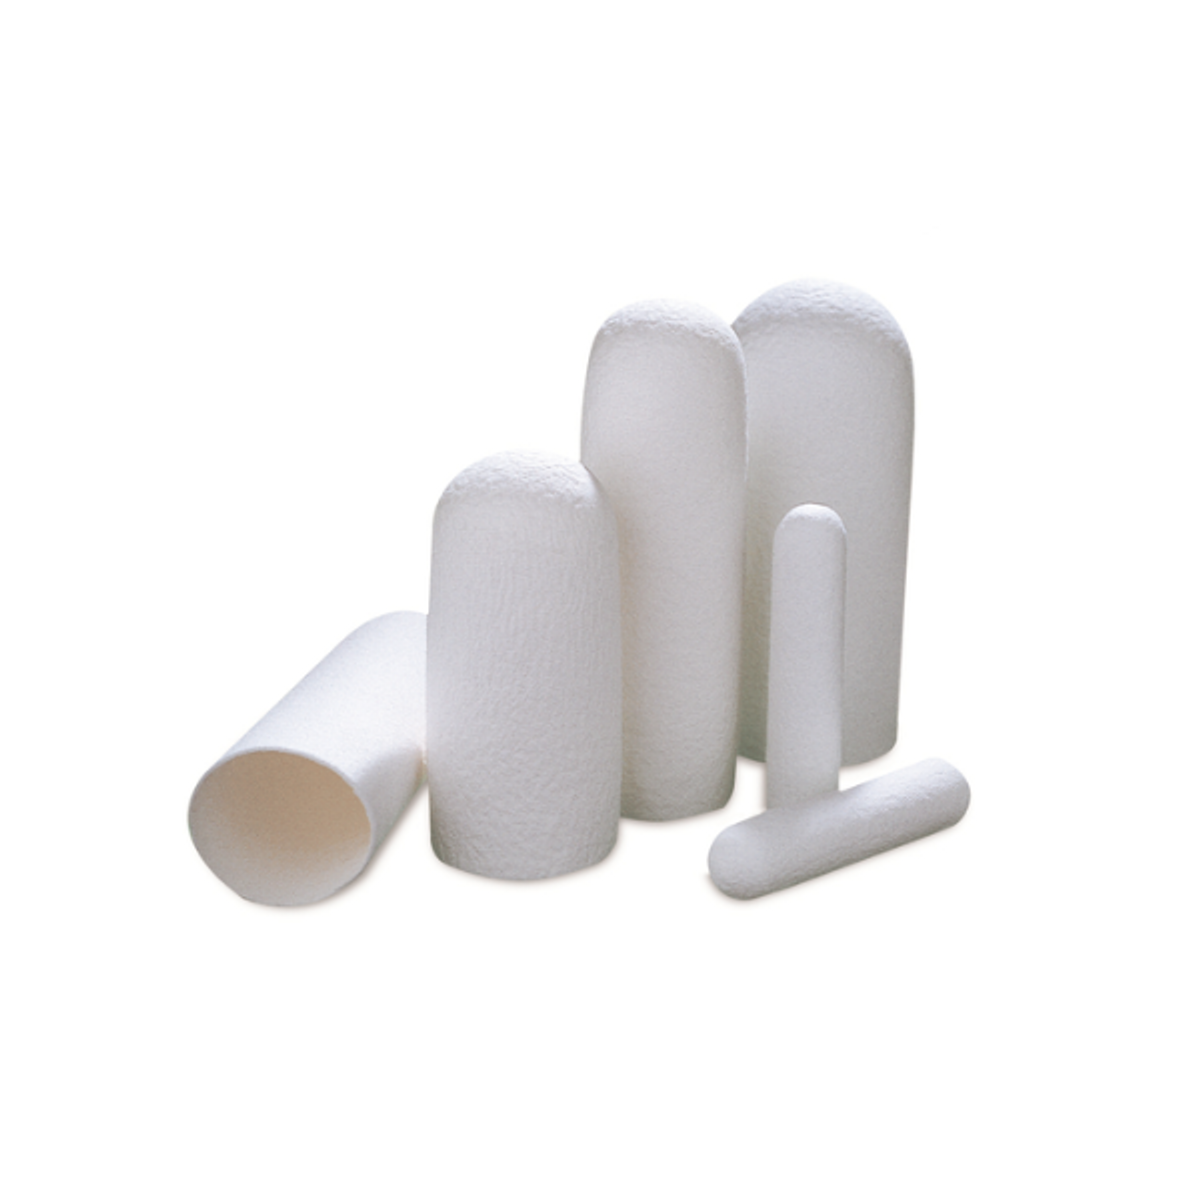 Cytiva Standard Cellulose Extraction Thimbles